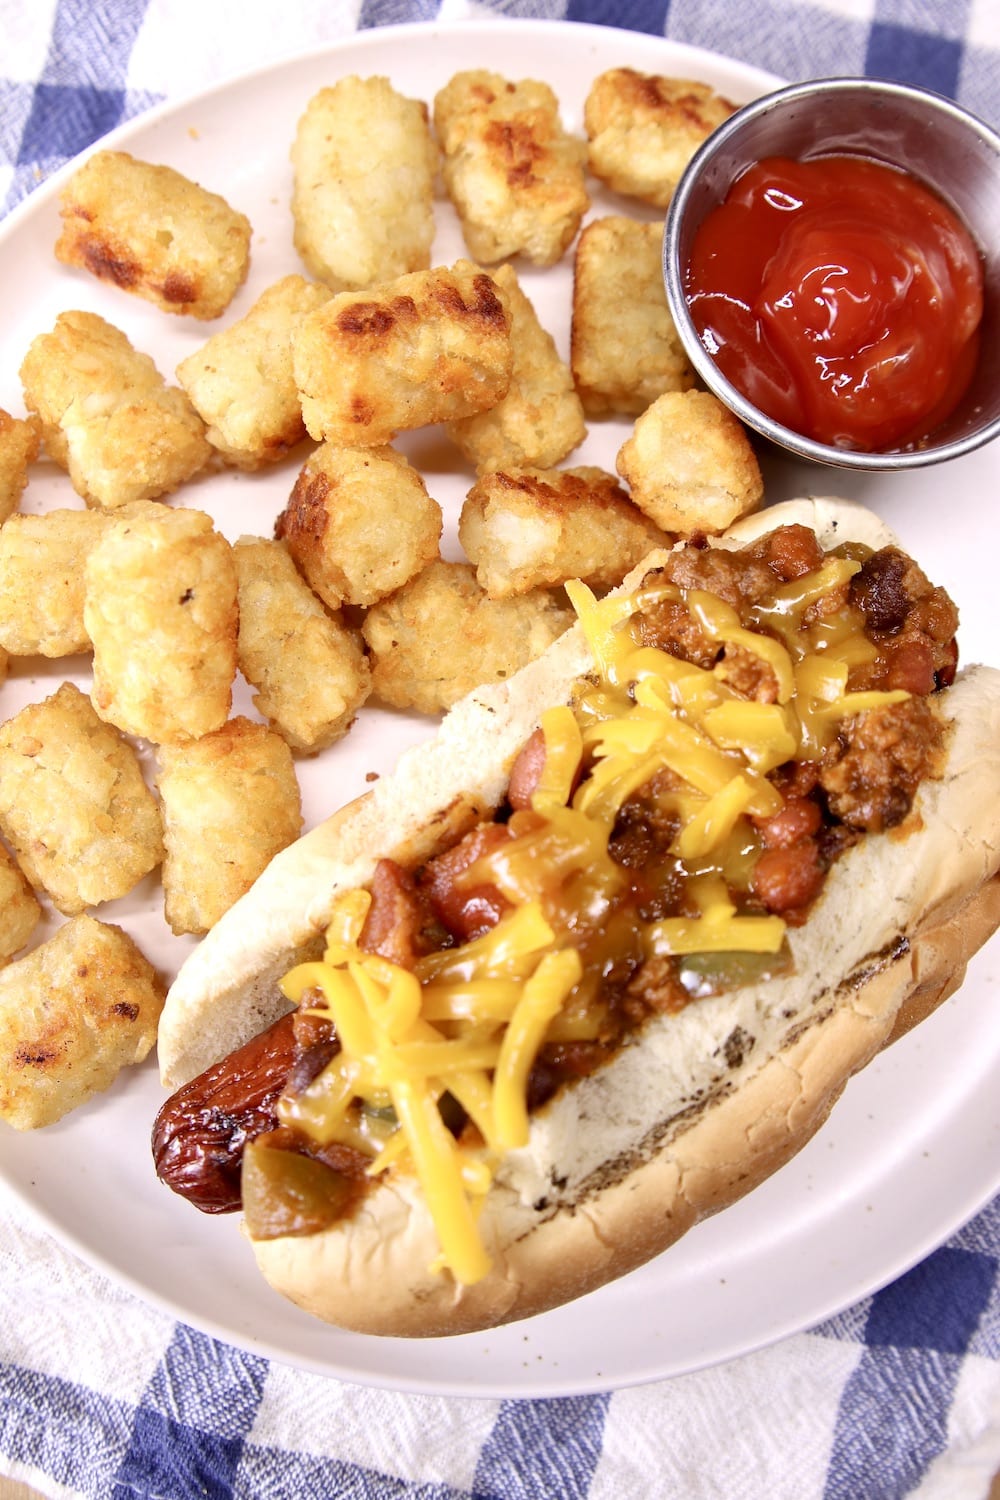 plate with chili cheese dog and tater tots